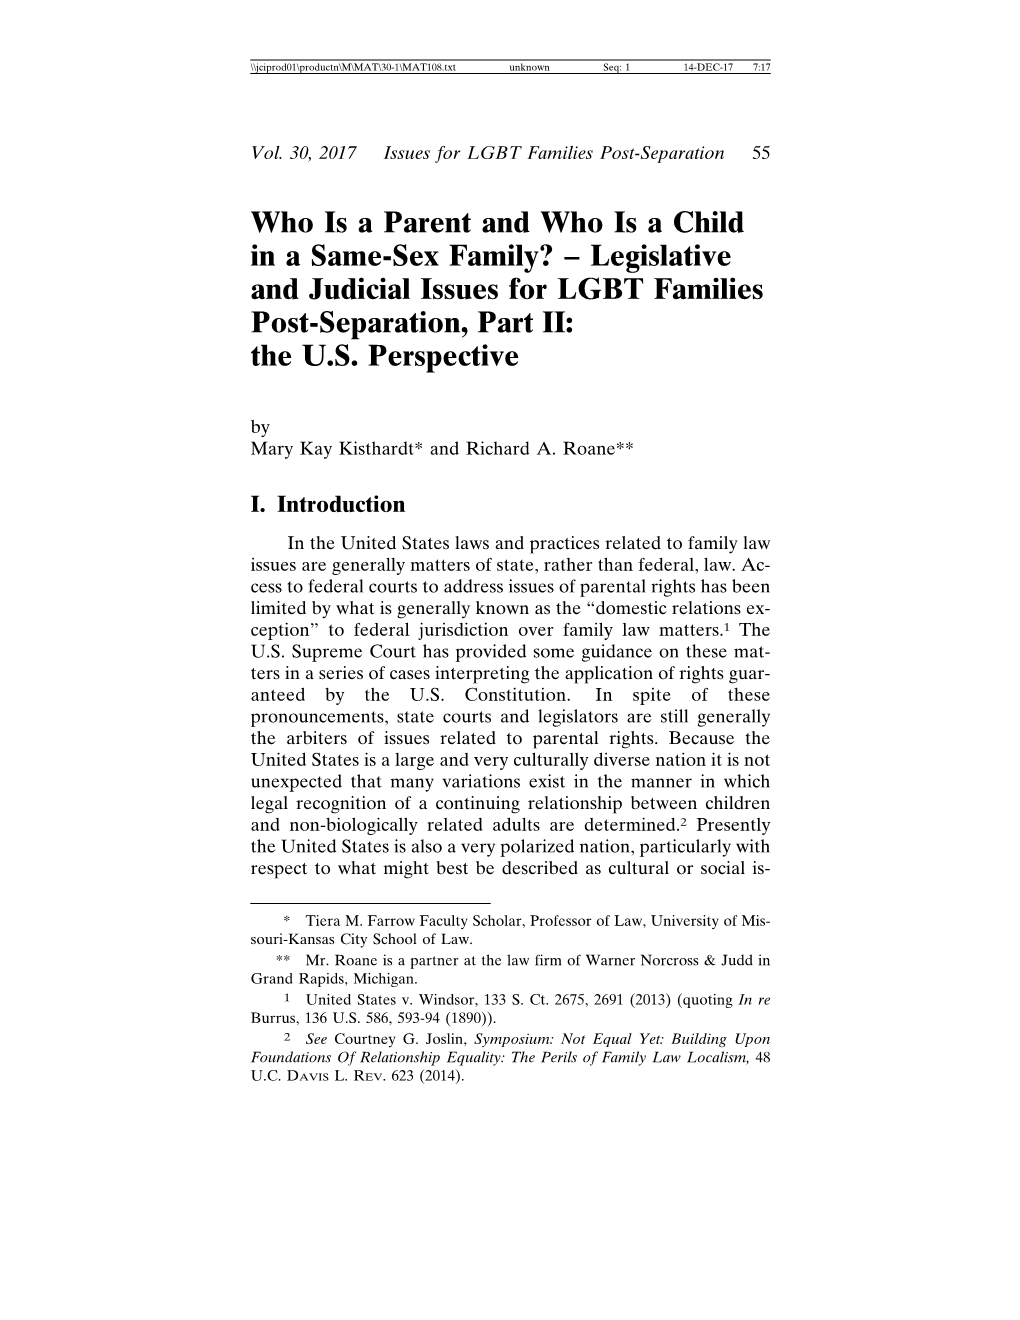 Who Is a Parent and Who Is a Child in a Same-Sex Family? – Legislative and Judicial Issues for LGBT Families Post-Separation, Part II: the U.S